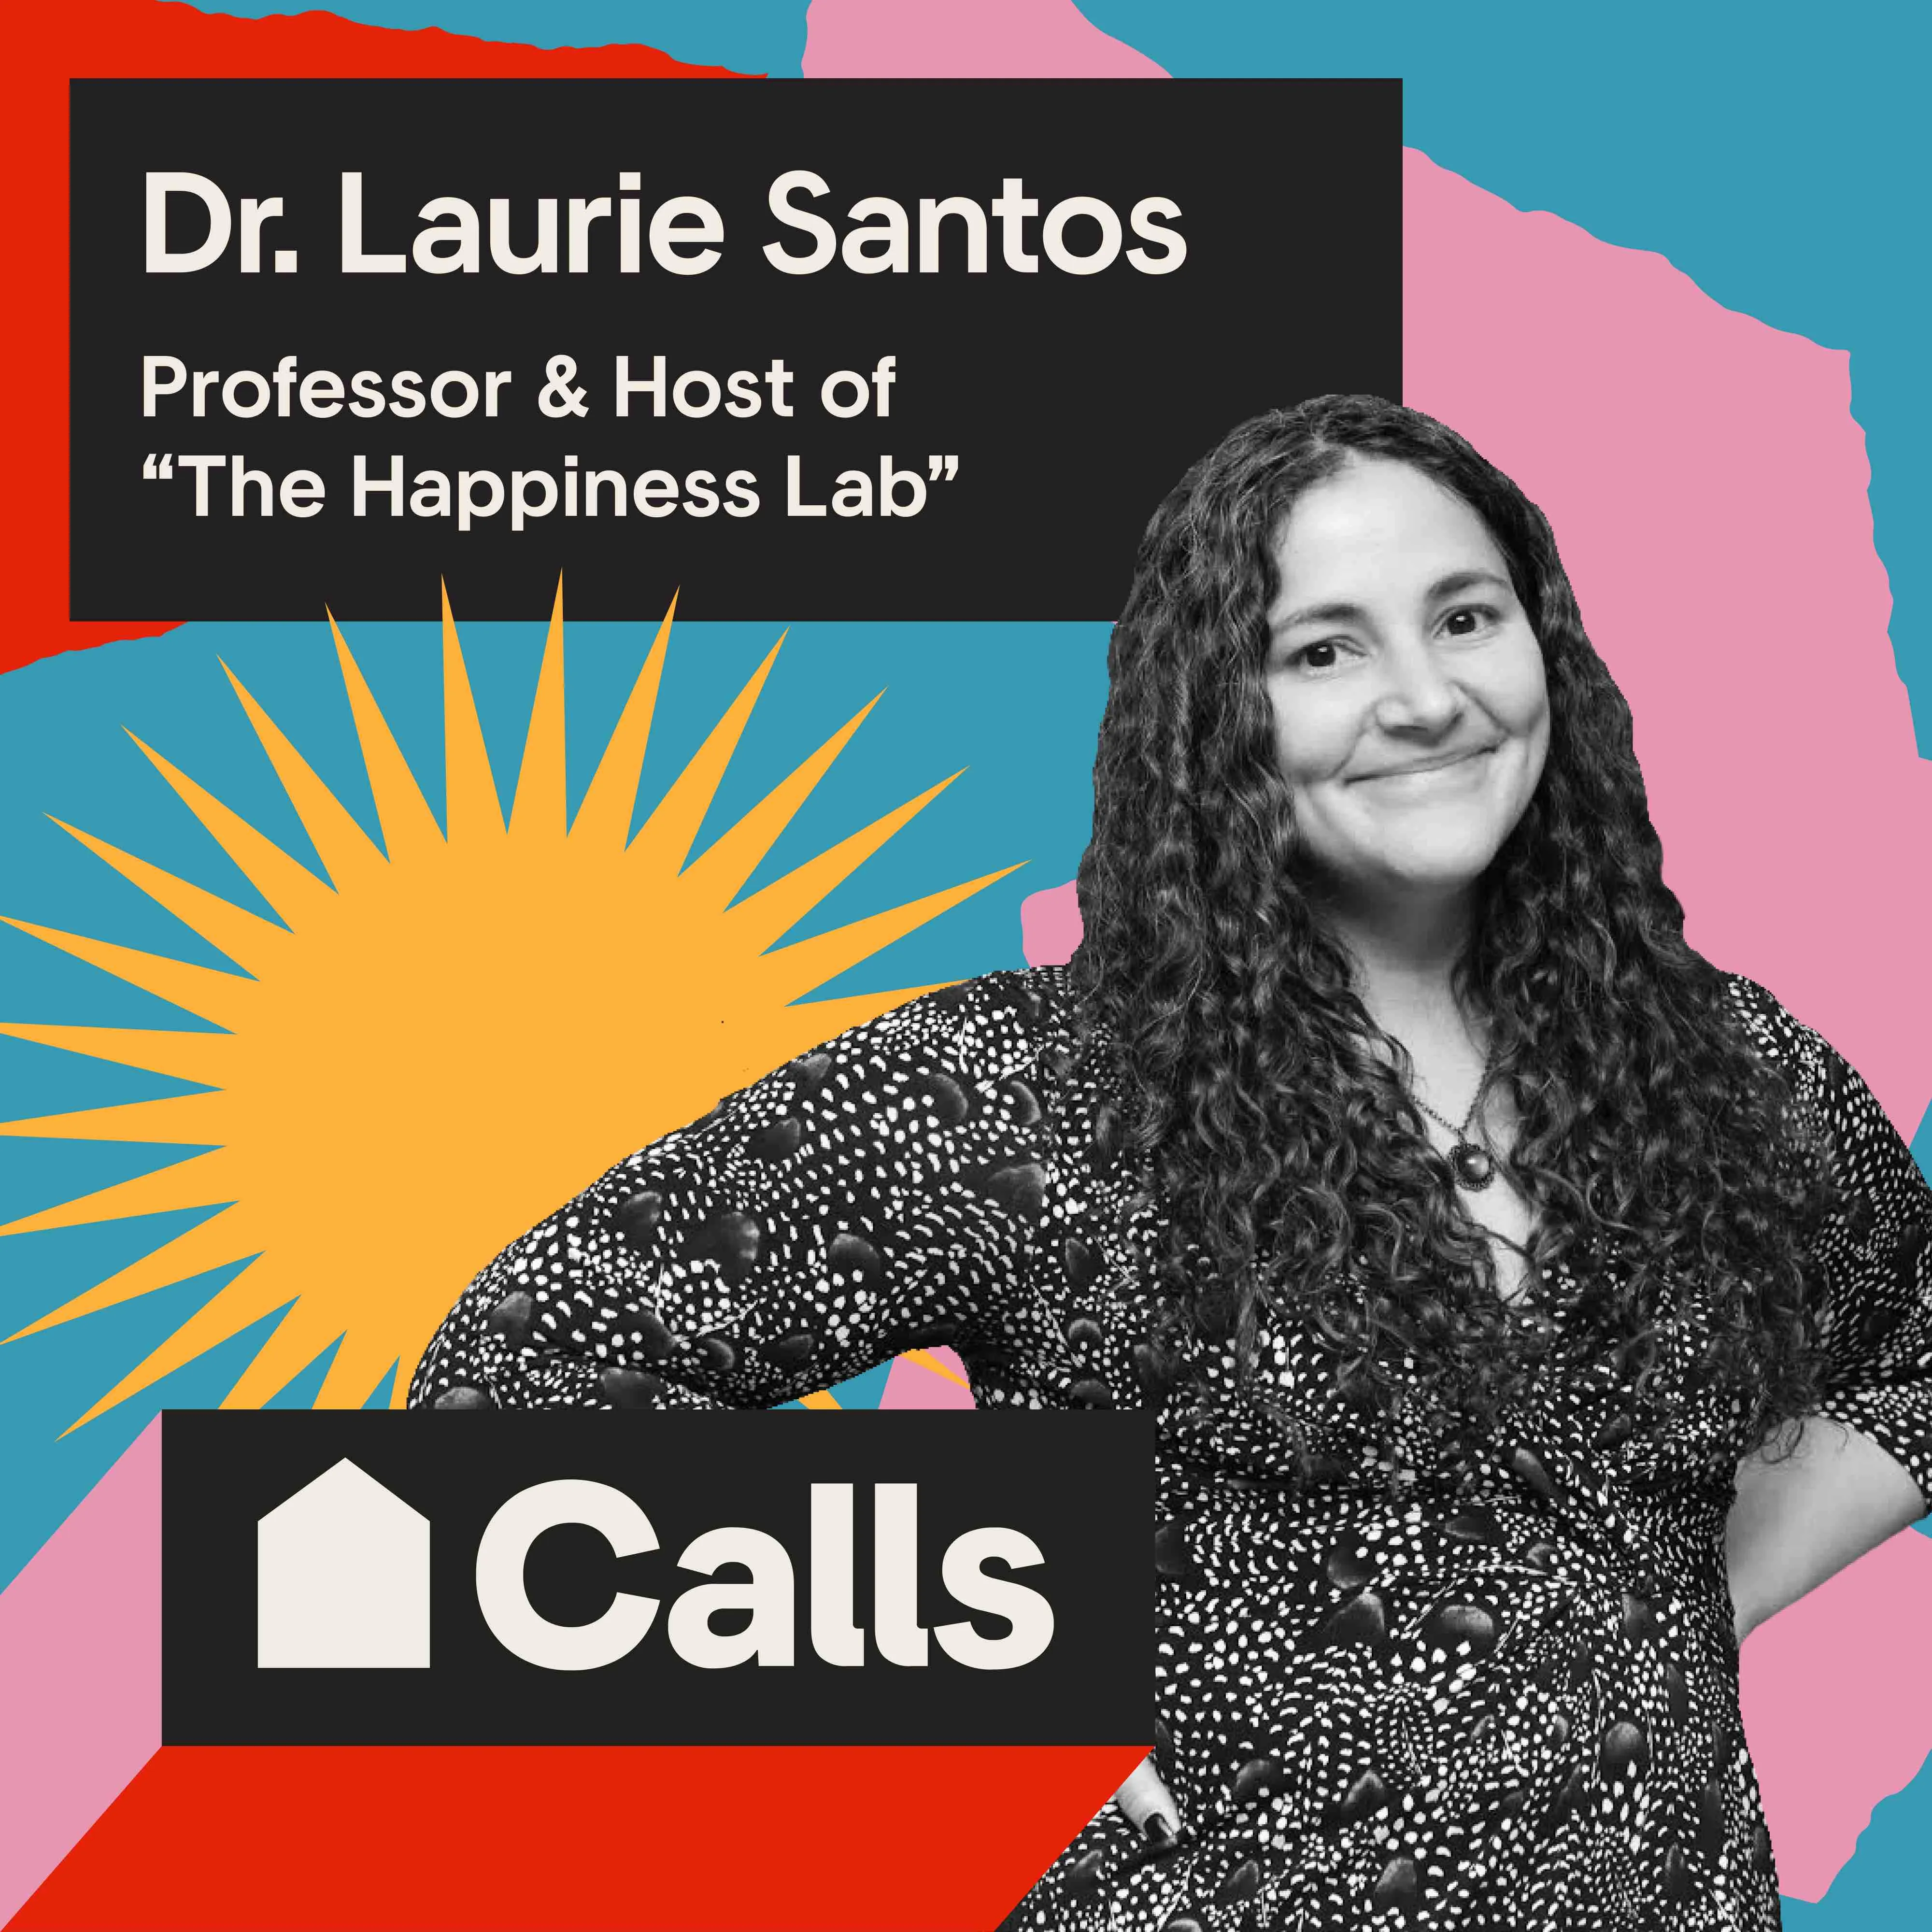 Headshot of Dr. Laurie Santos, Professor of Psychology at Yale University and Host of the podcast, “The Happiness Lab”